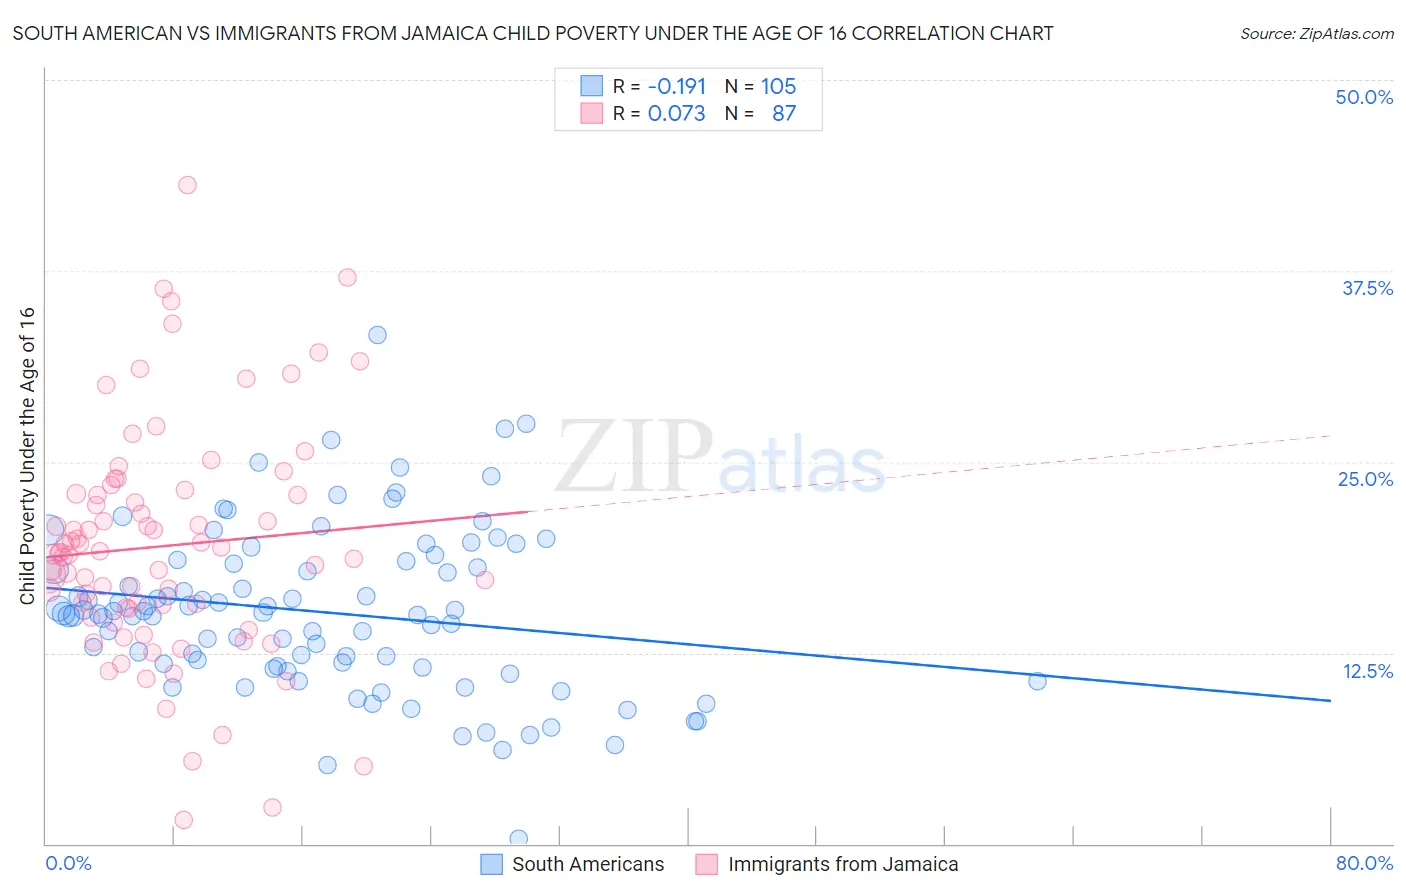 South American vs Immigrants from Jamaica Child Poverty Under the Age of 16